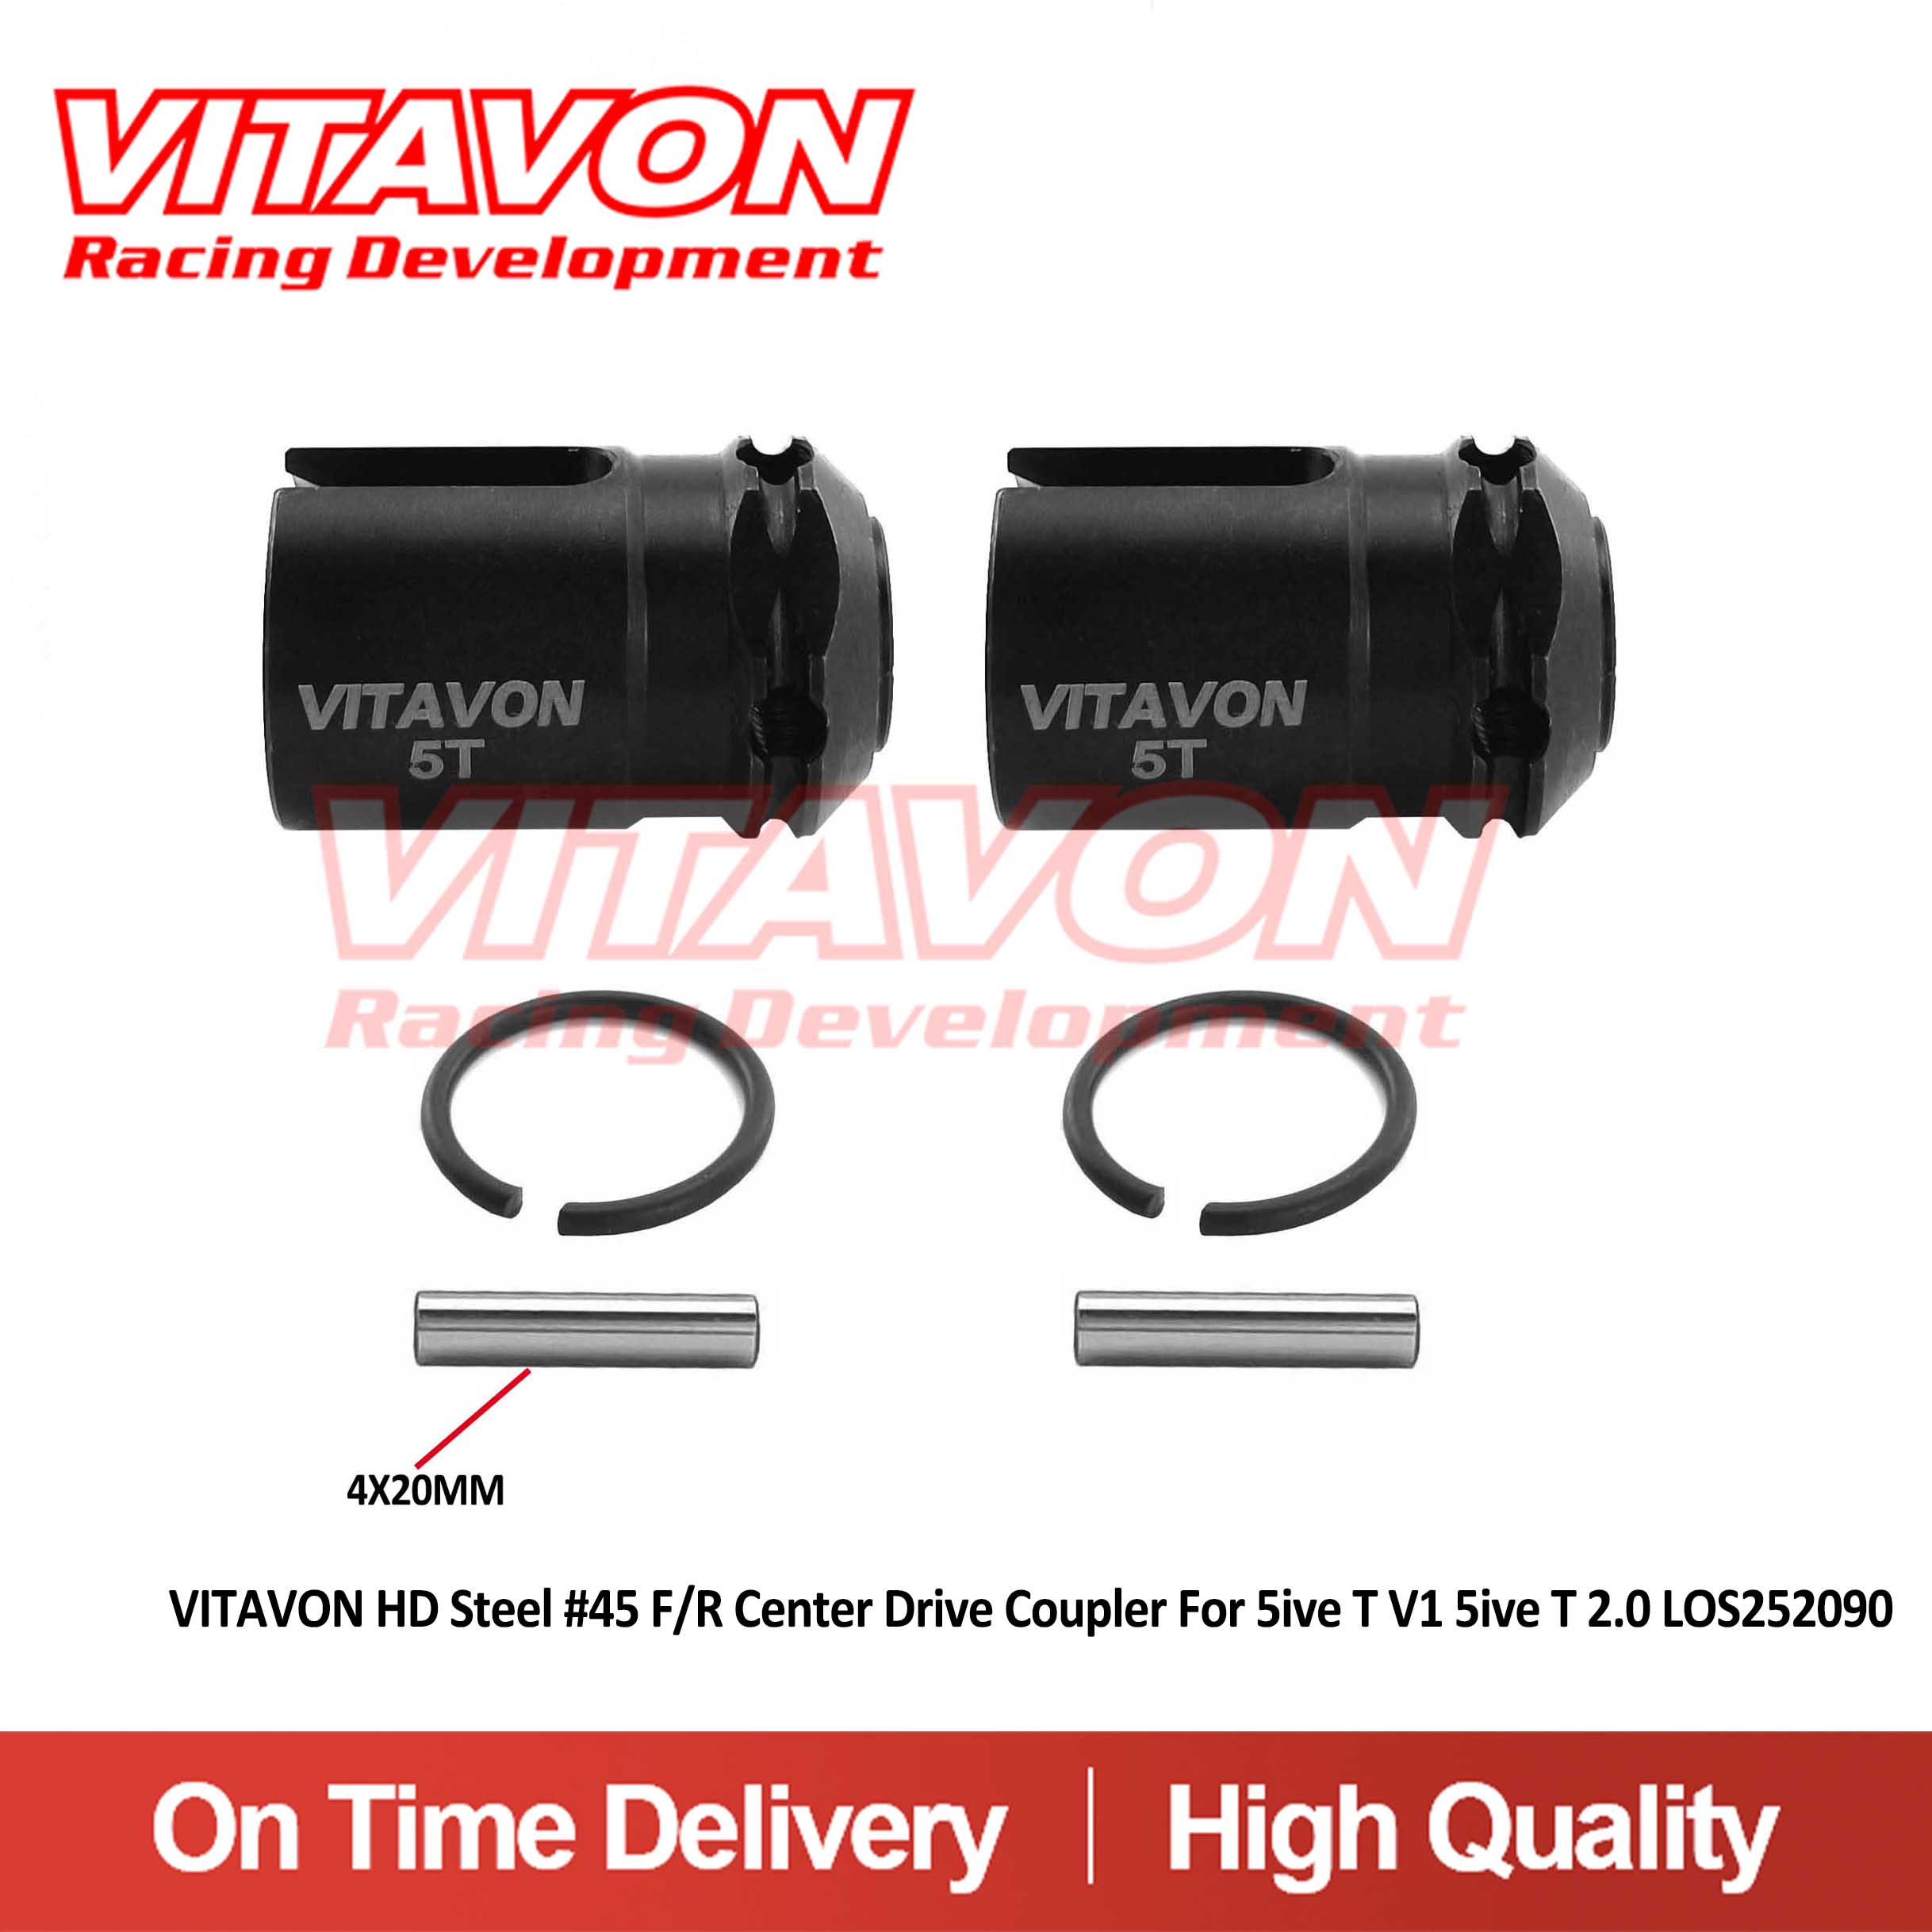 VITAVON HD Steel #45 F/R Center Drive Coupler For 5ive T V1 5ive T 2.0 LOS252090